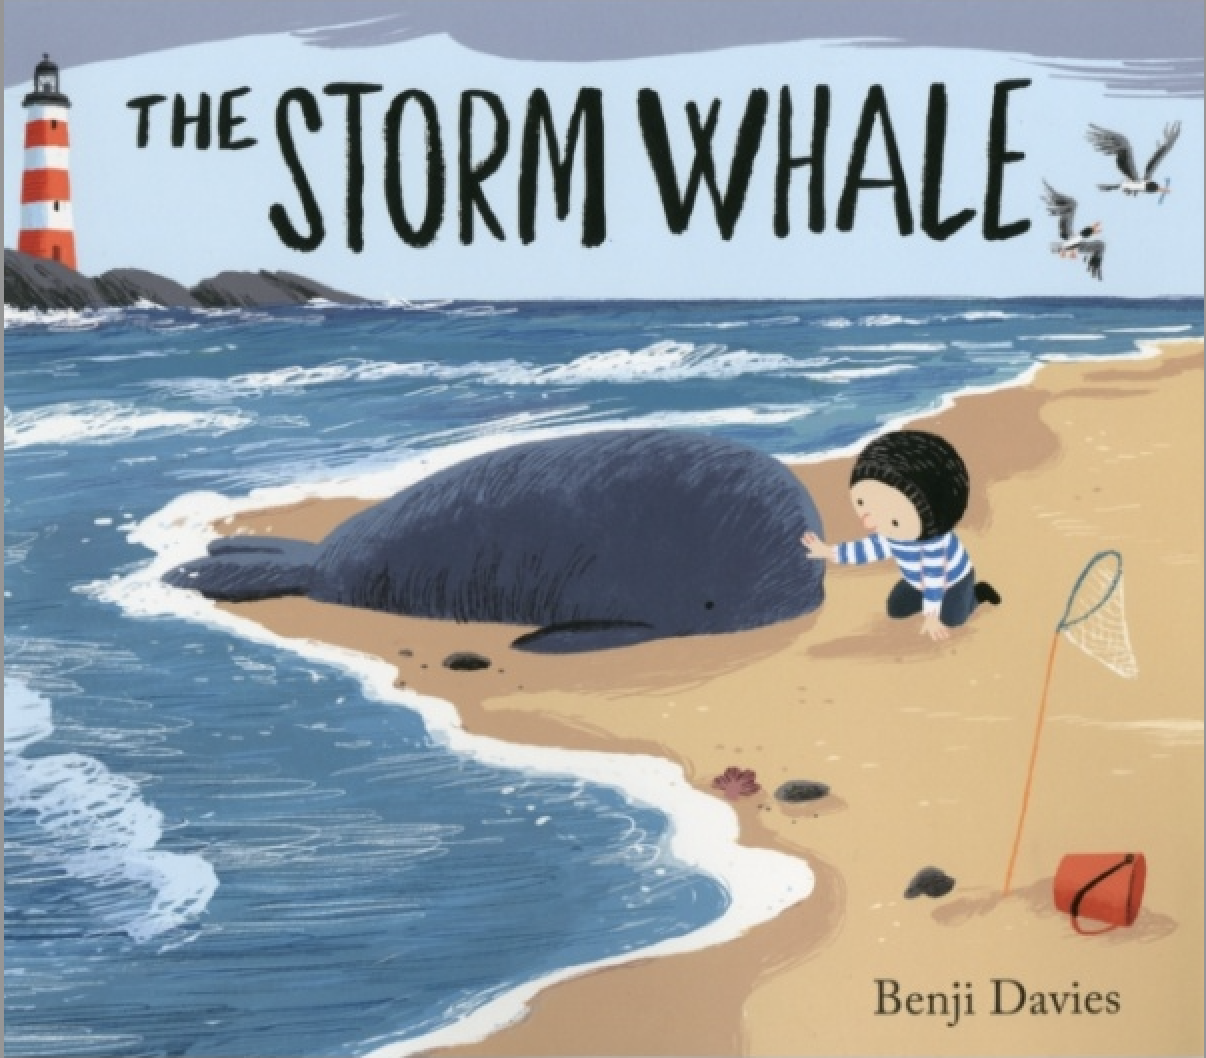 The Storm Whale - book by Benji Davies